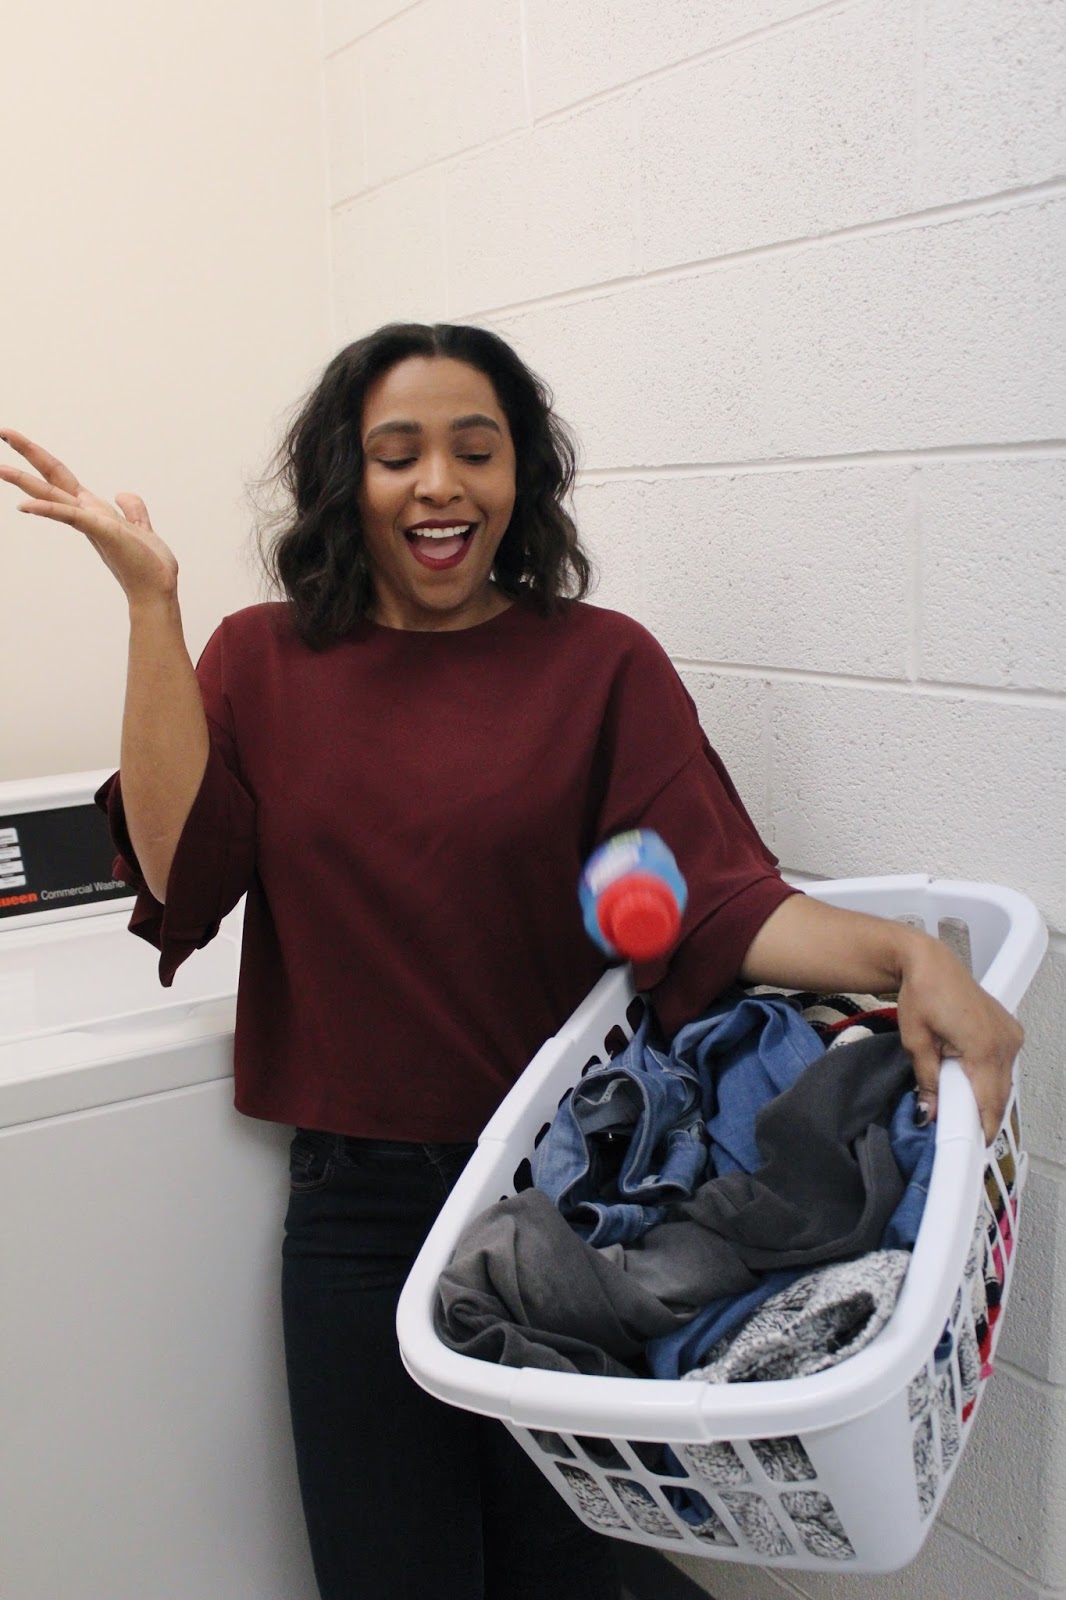 Tips On How To Keep Up With Your Laundry, Persil, Persil Target,  Persil pro clean, persil detergent, laundry piles, washing machine, laundry room, laundry basket